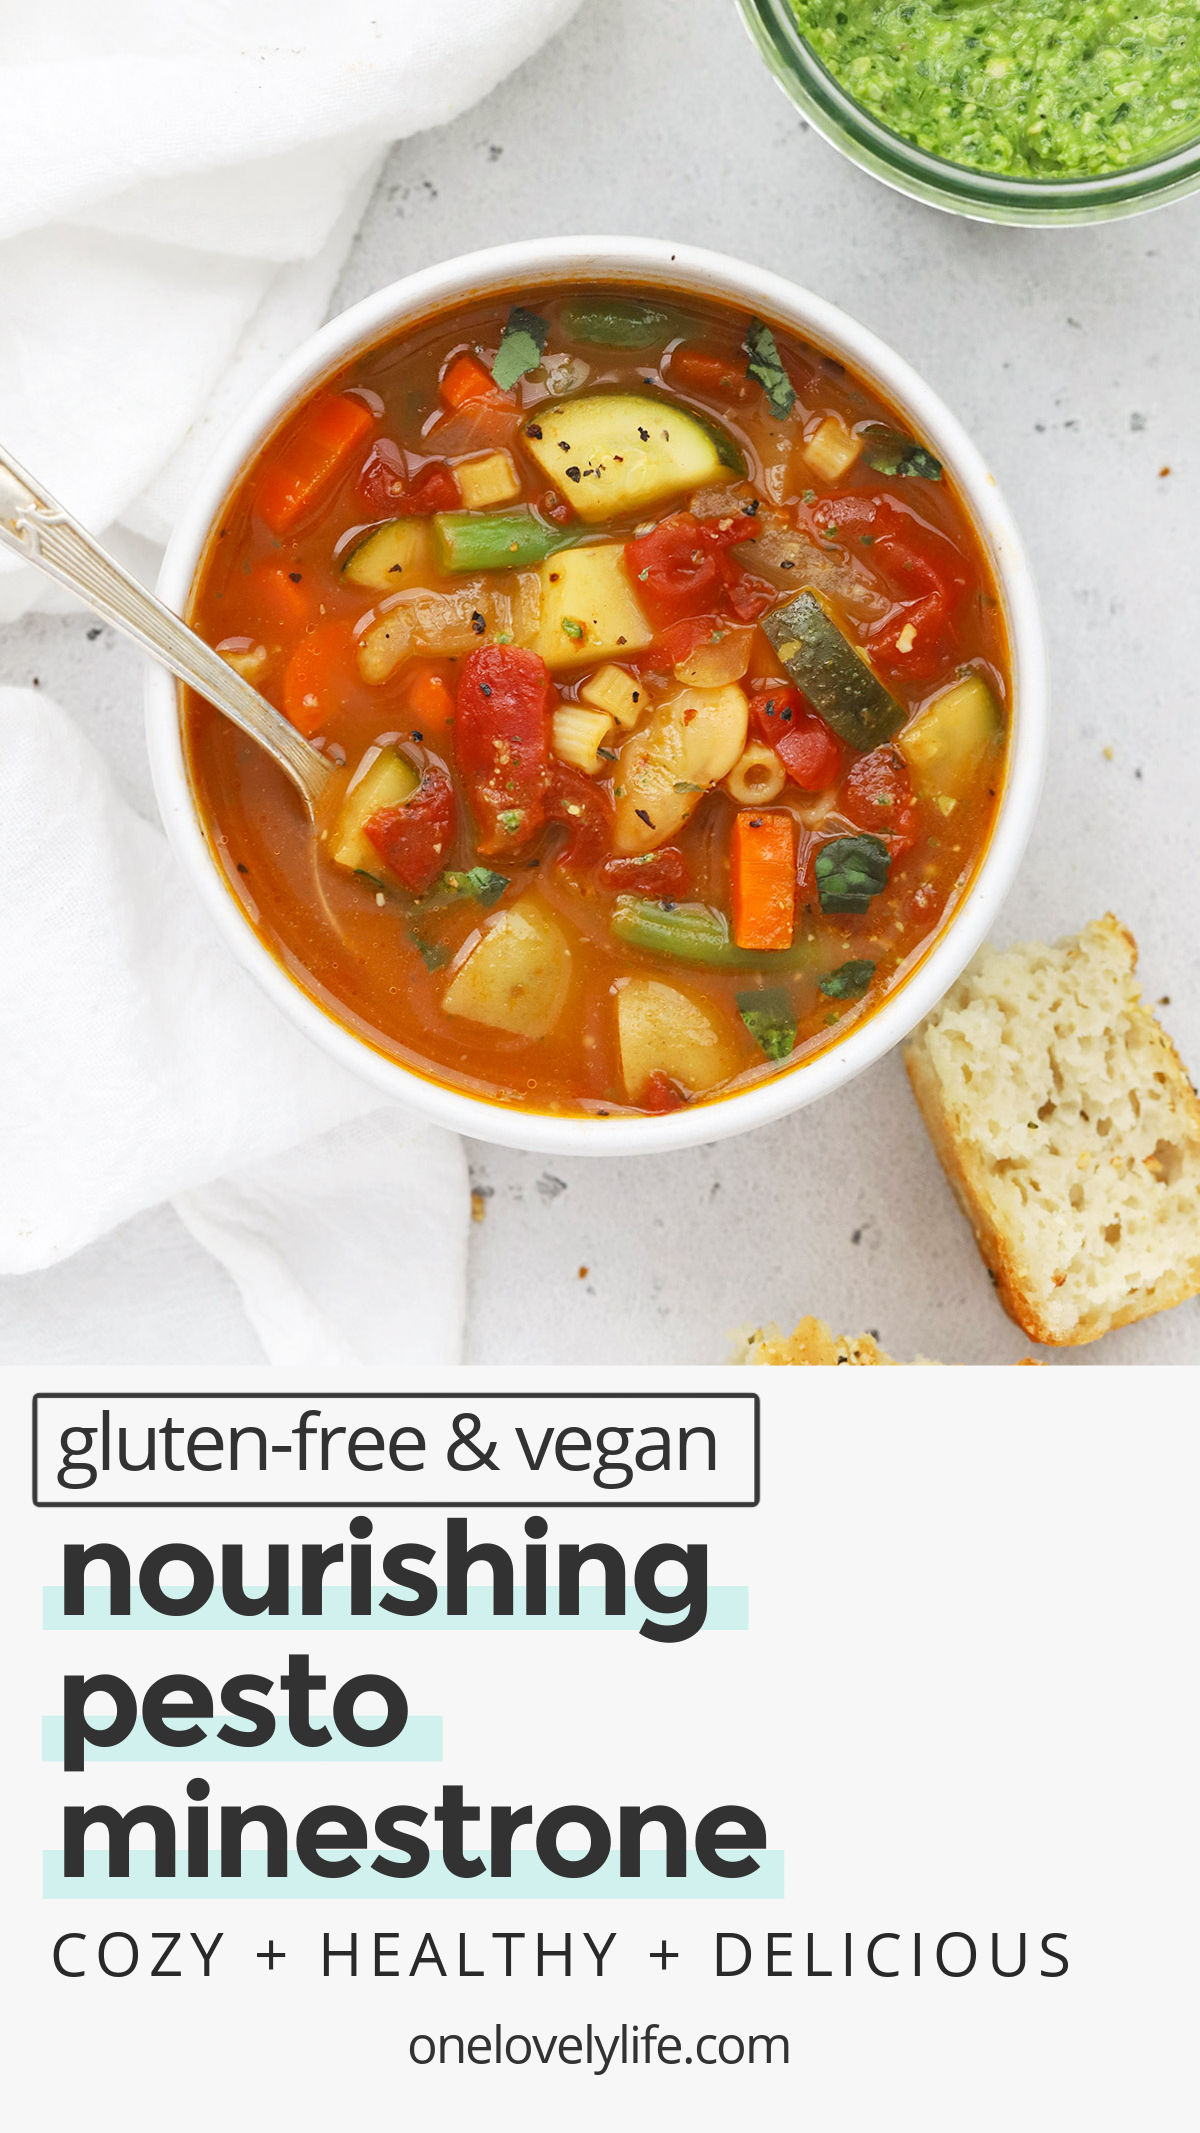 Pesto Minestrone - This gorgeous, vegetable soup is the perfect thing to warm and fill you without weighing you down. (Gluten-Free, Vegan) // Vegetable Soup // Minestrone Soup recipe // vegan soup // gluten-free minestrone // vegan dinner // vegetarian dinner // pesto minestrone soup // healthy dinner // healthy soup